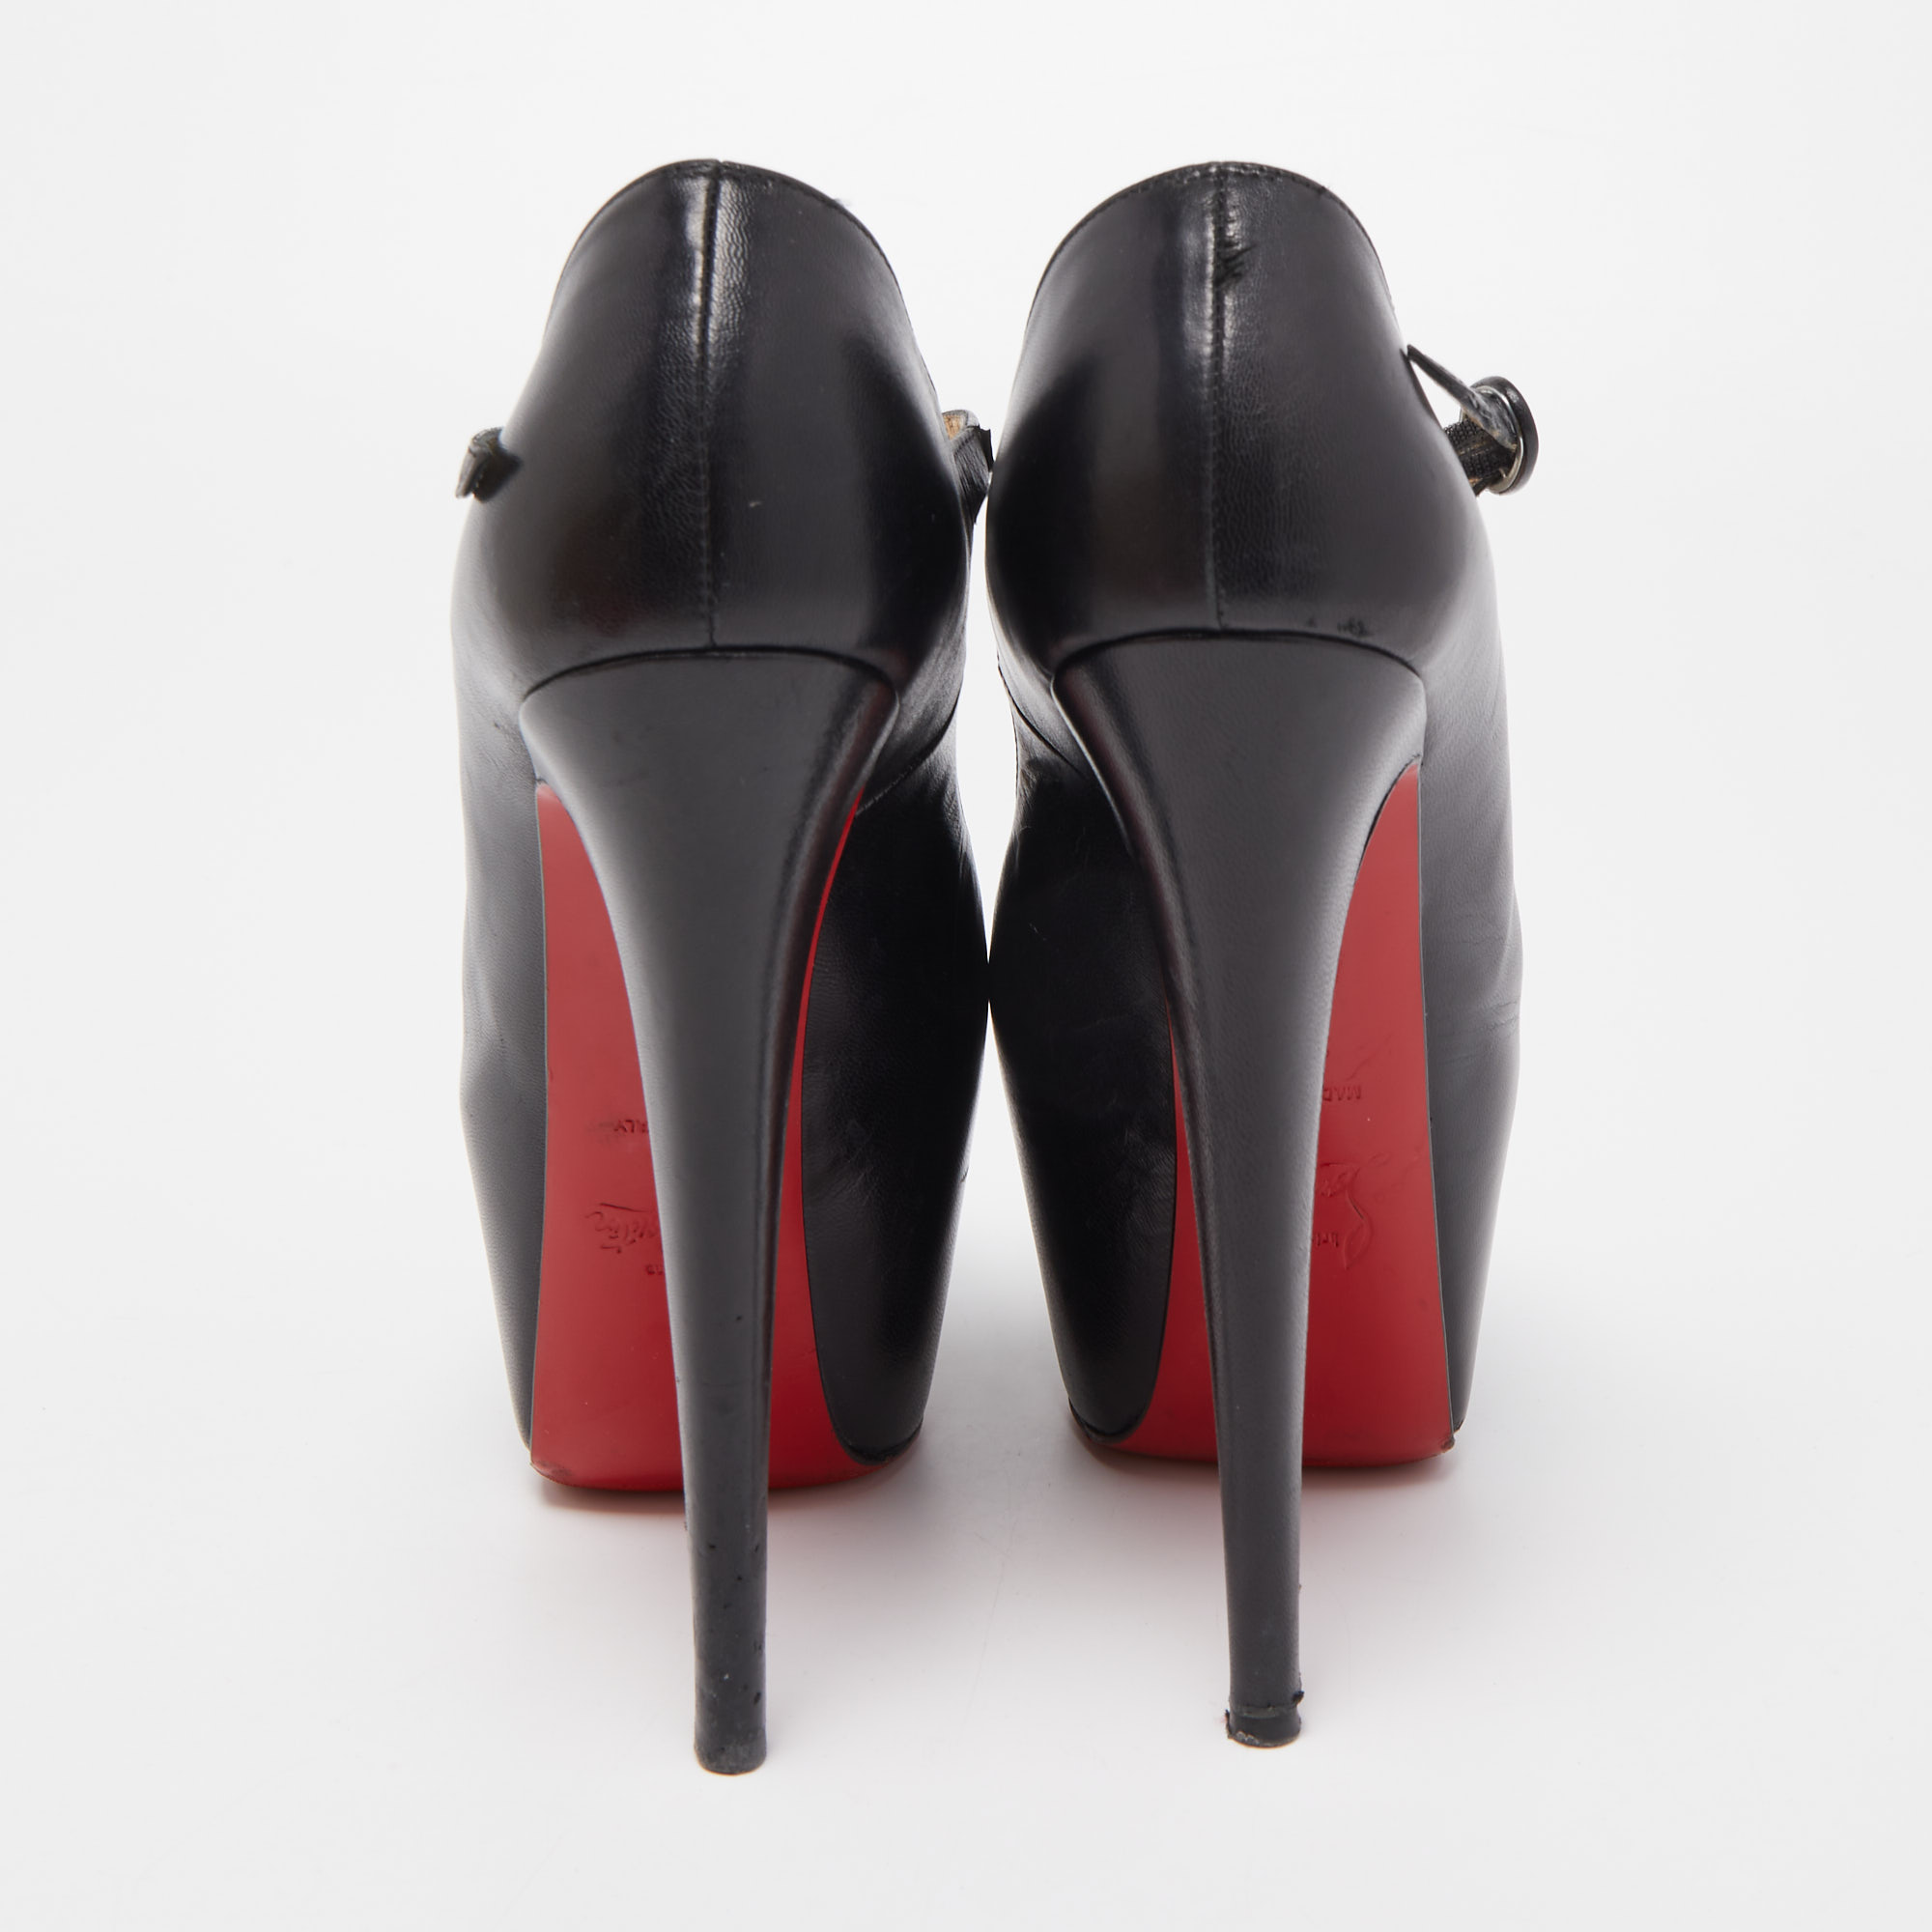 Christian Louboutin Black Leather Lady Highness Pumps Size 36.5